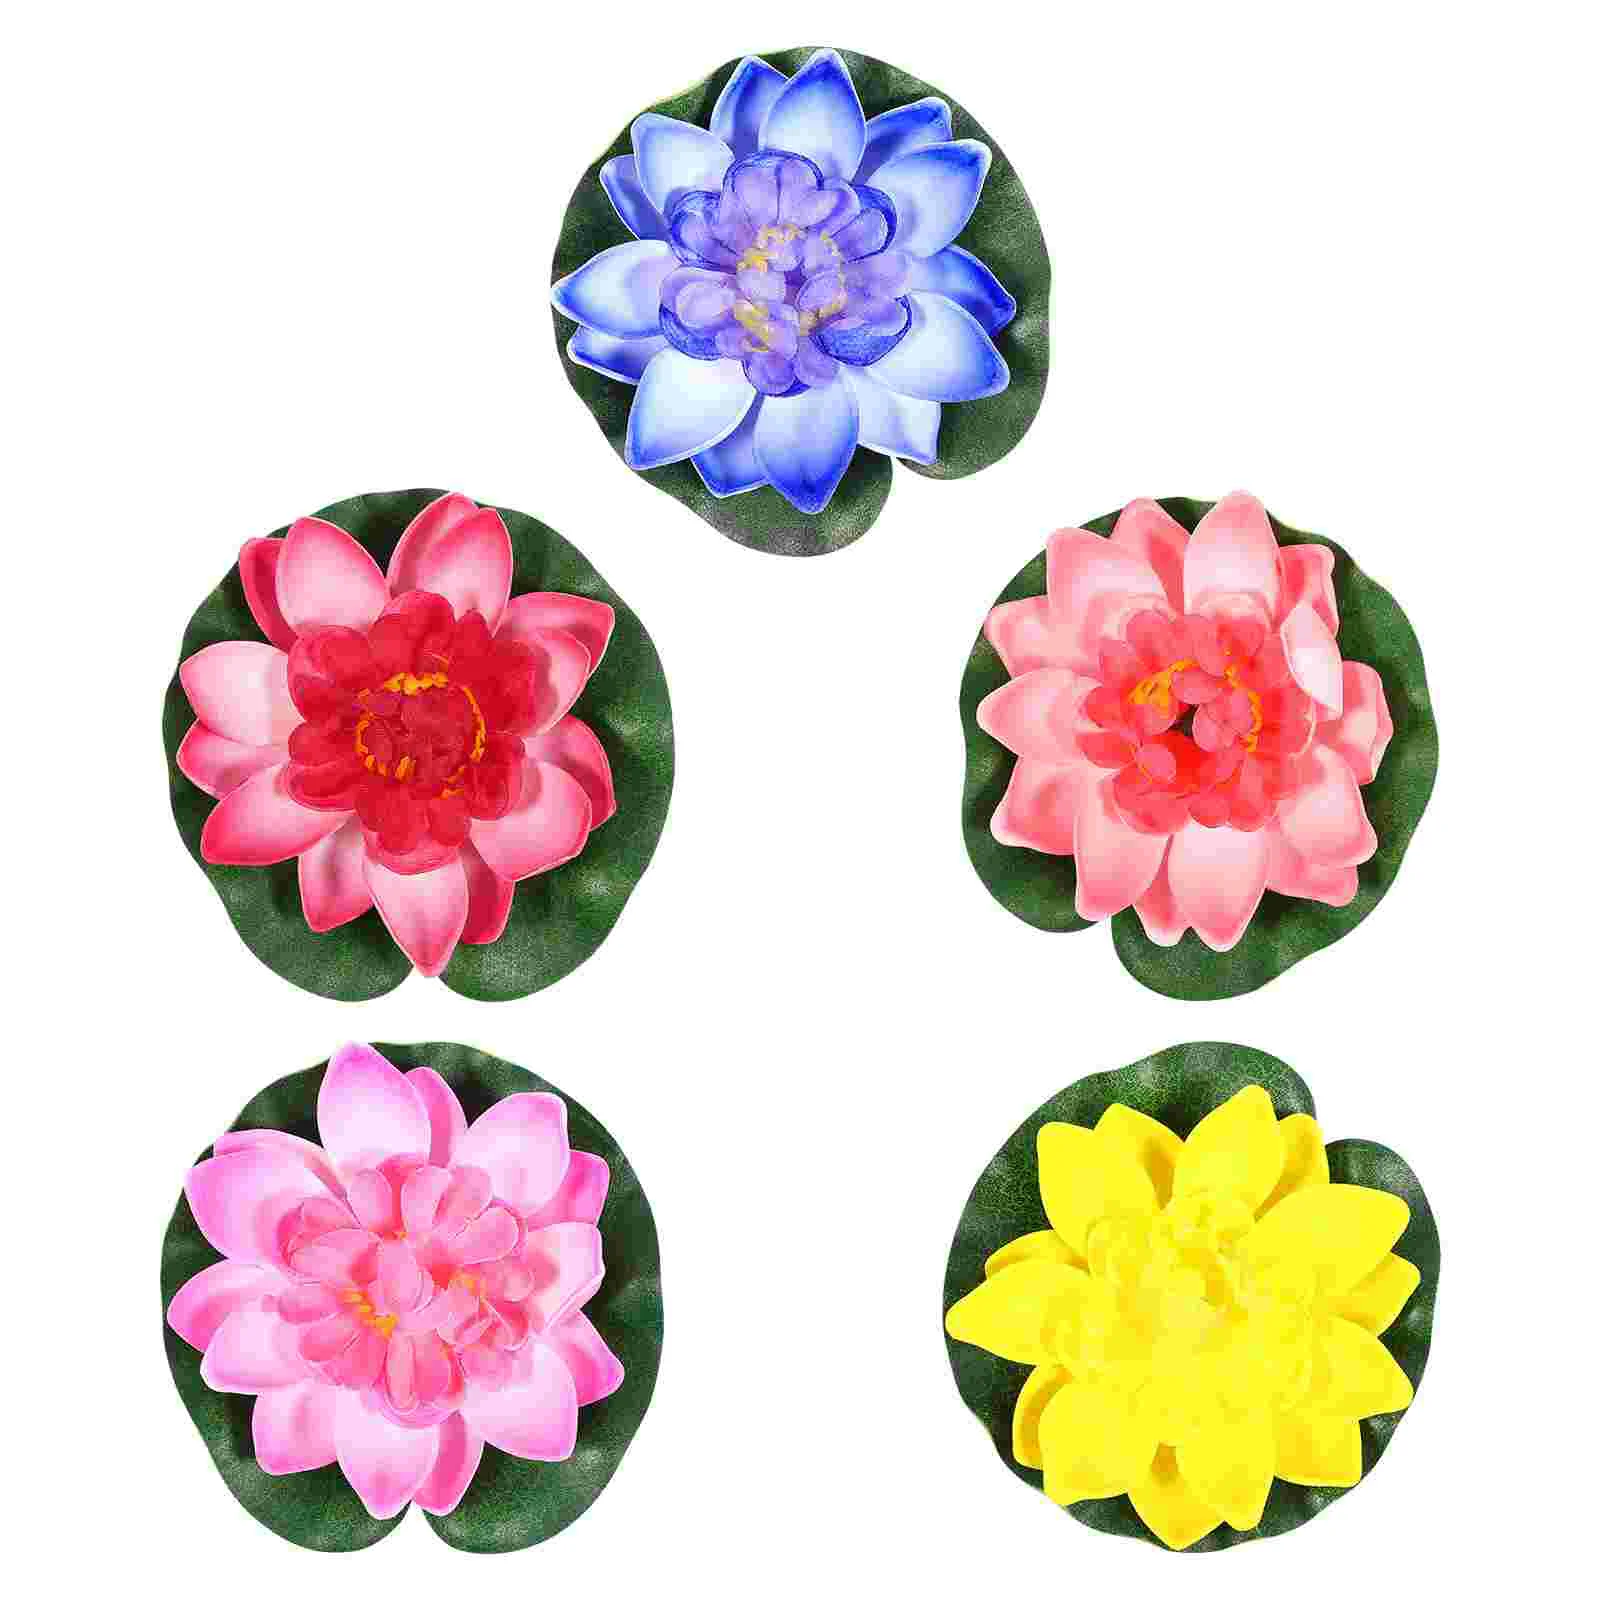 

Lily Floating Flower Pond Artificial Flowers Decor Water Pads Decorations Outdoor Simulated Lilly Pool Decoration Aquarium